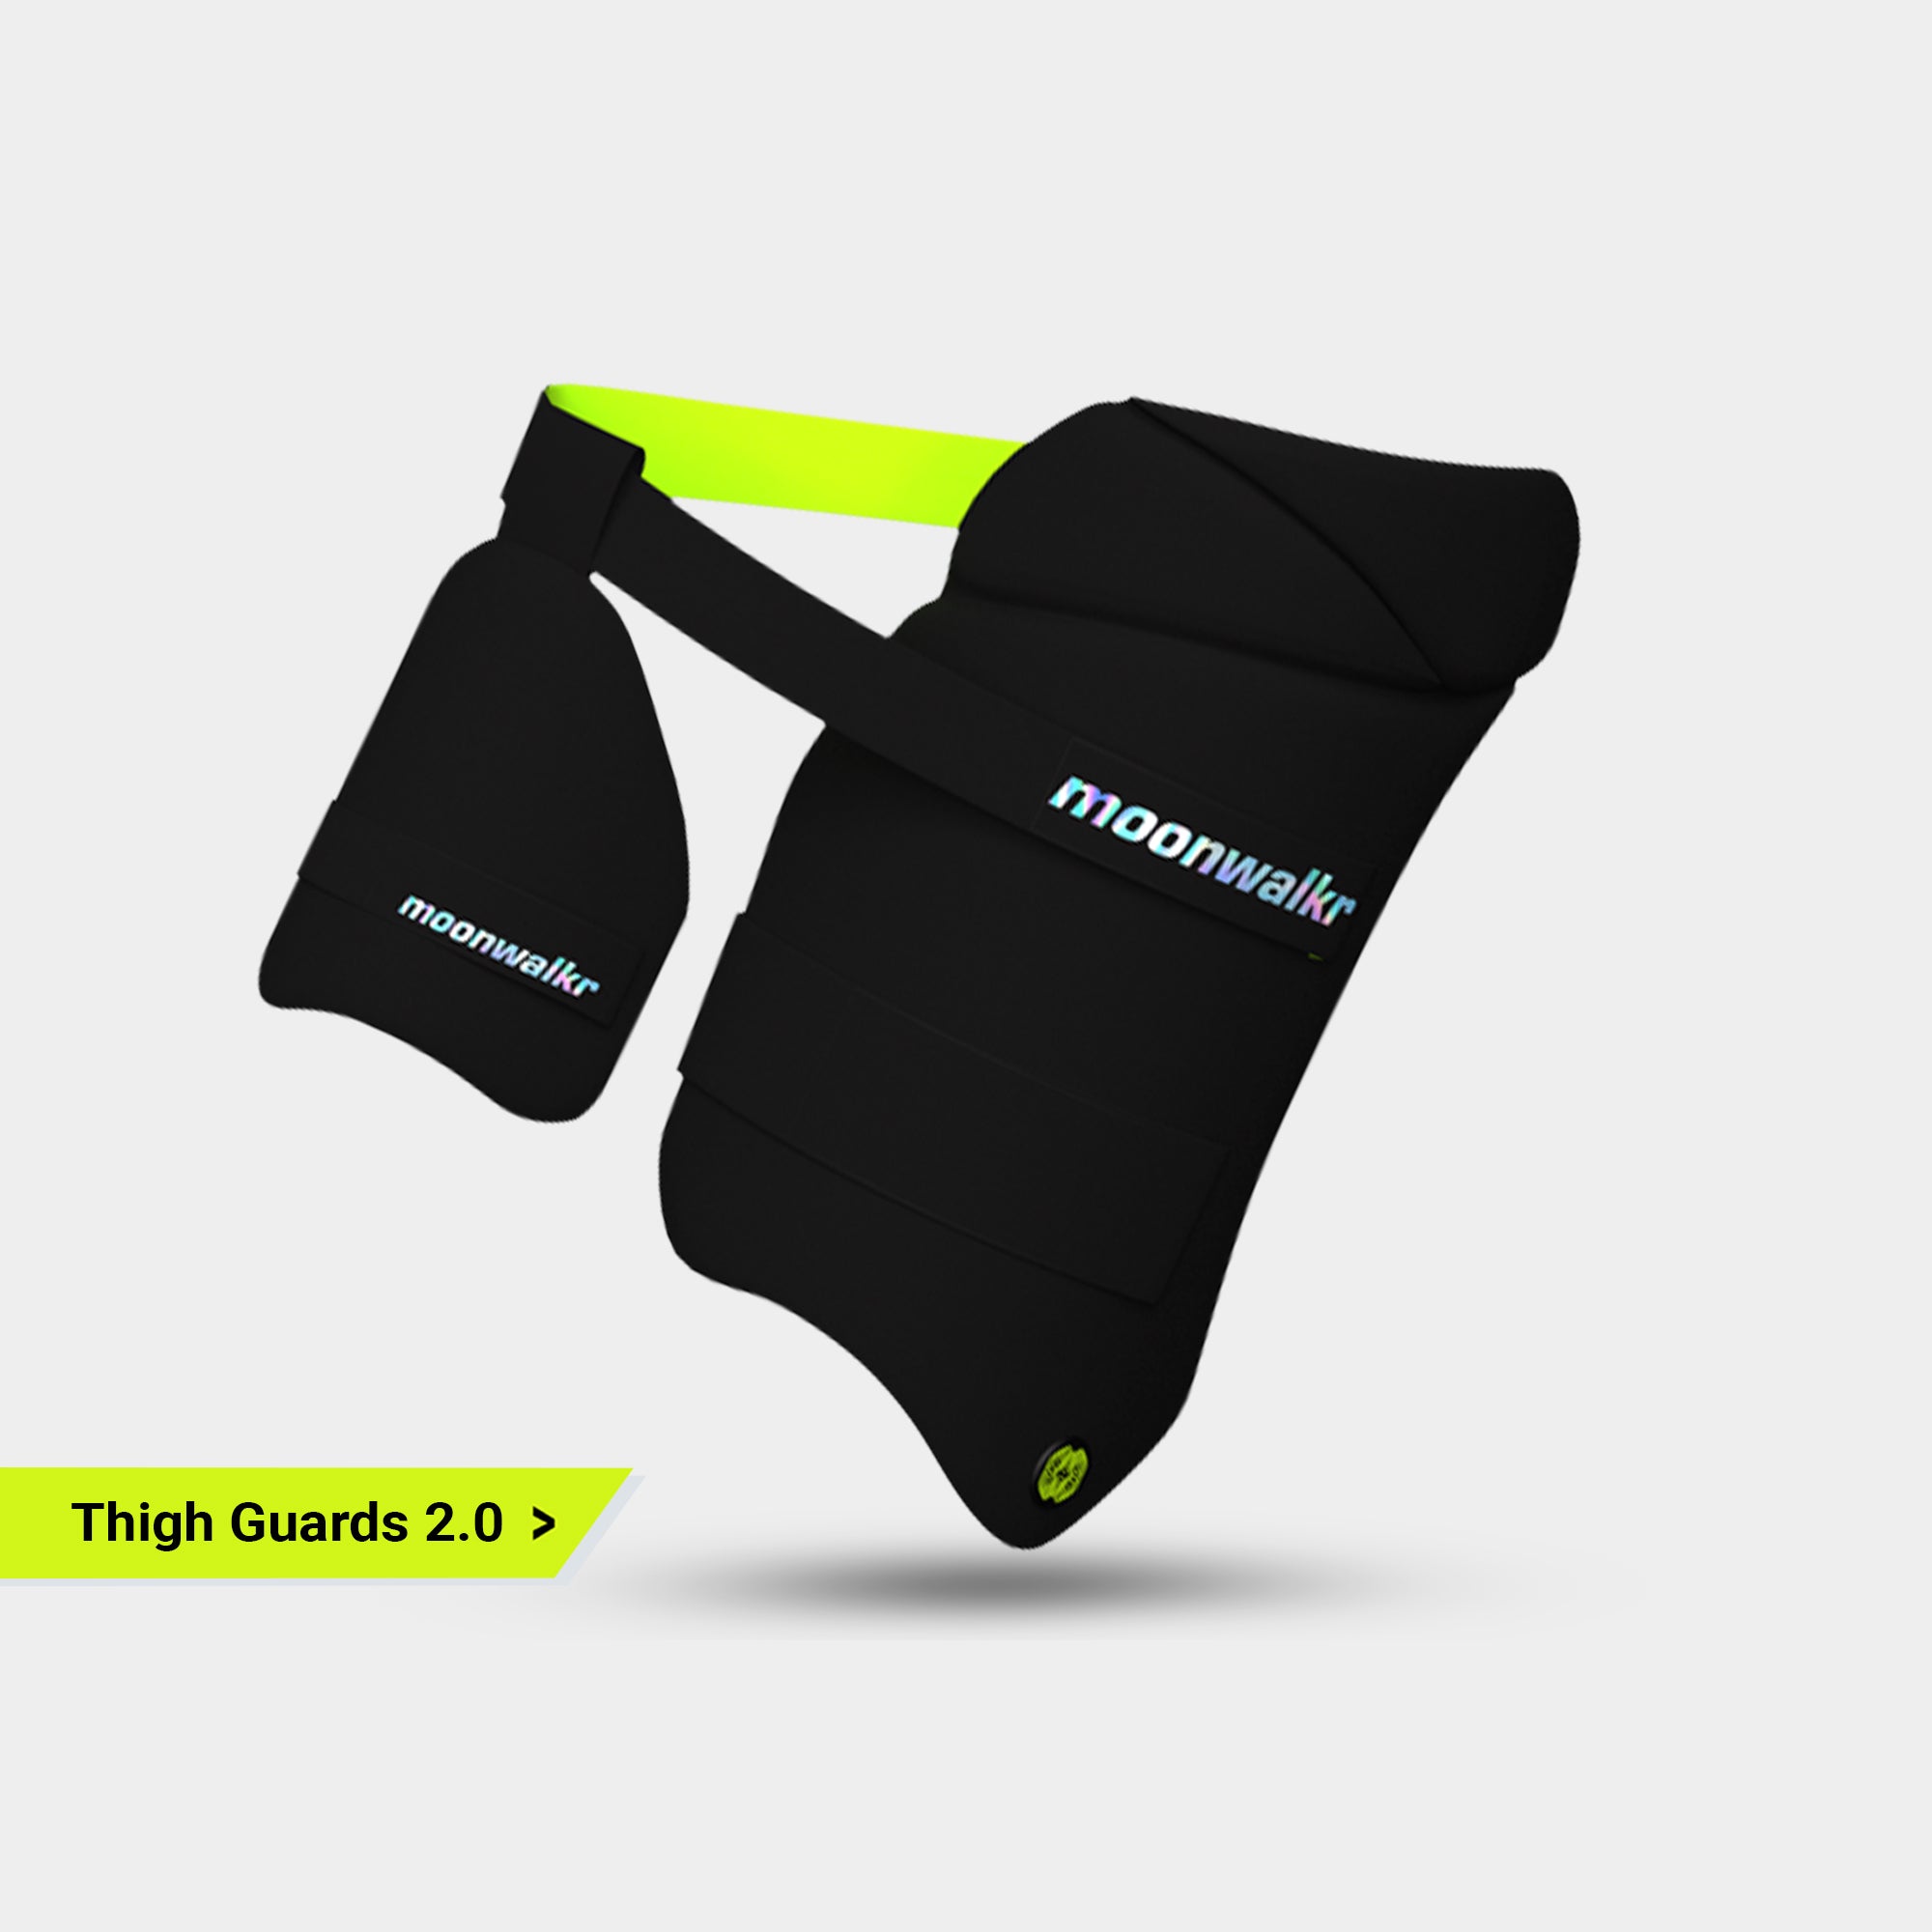 Thigh Guards